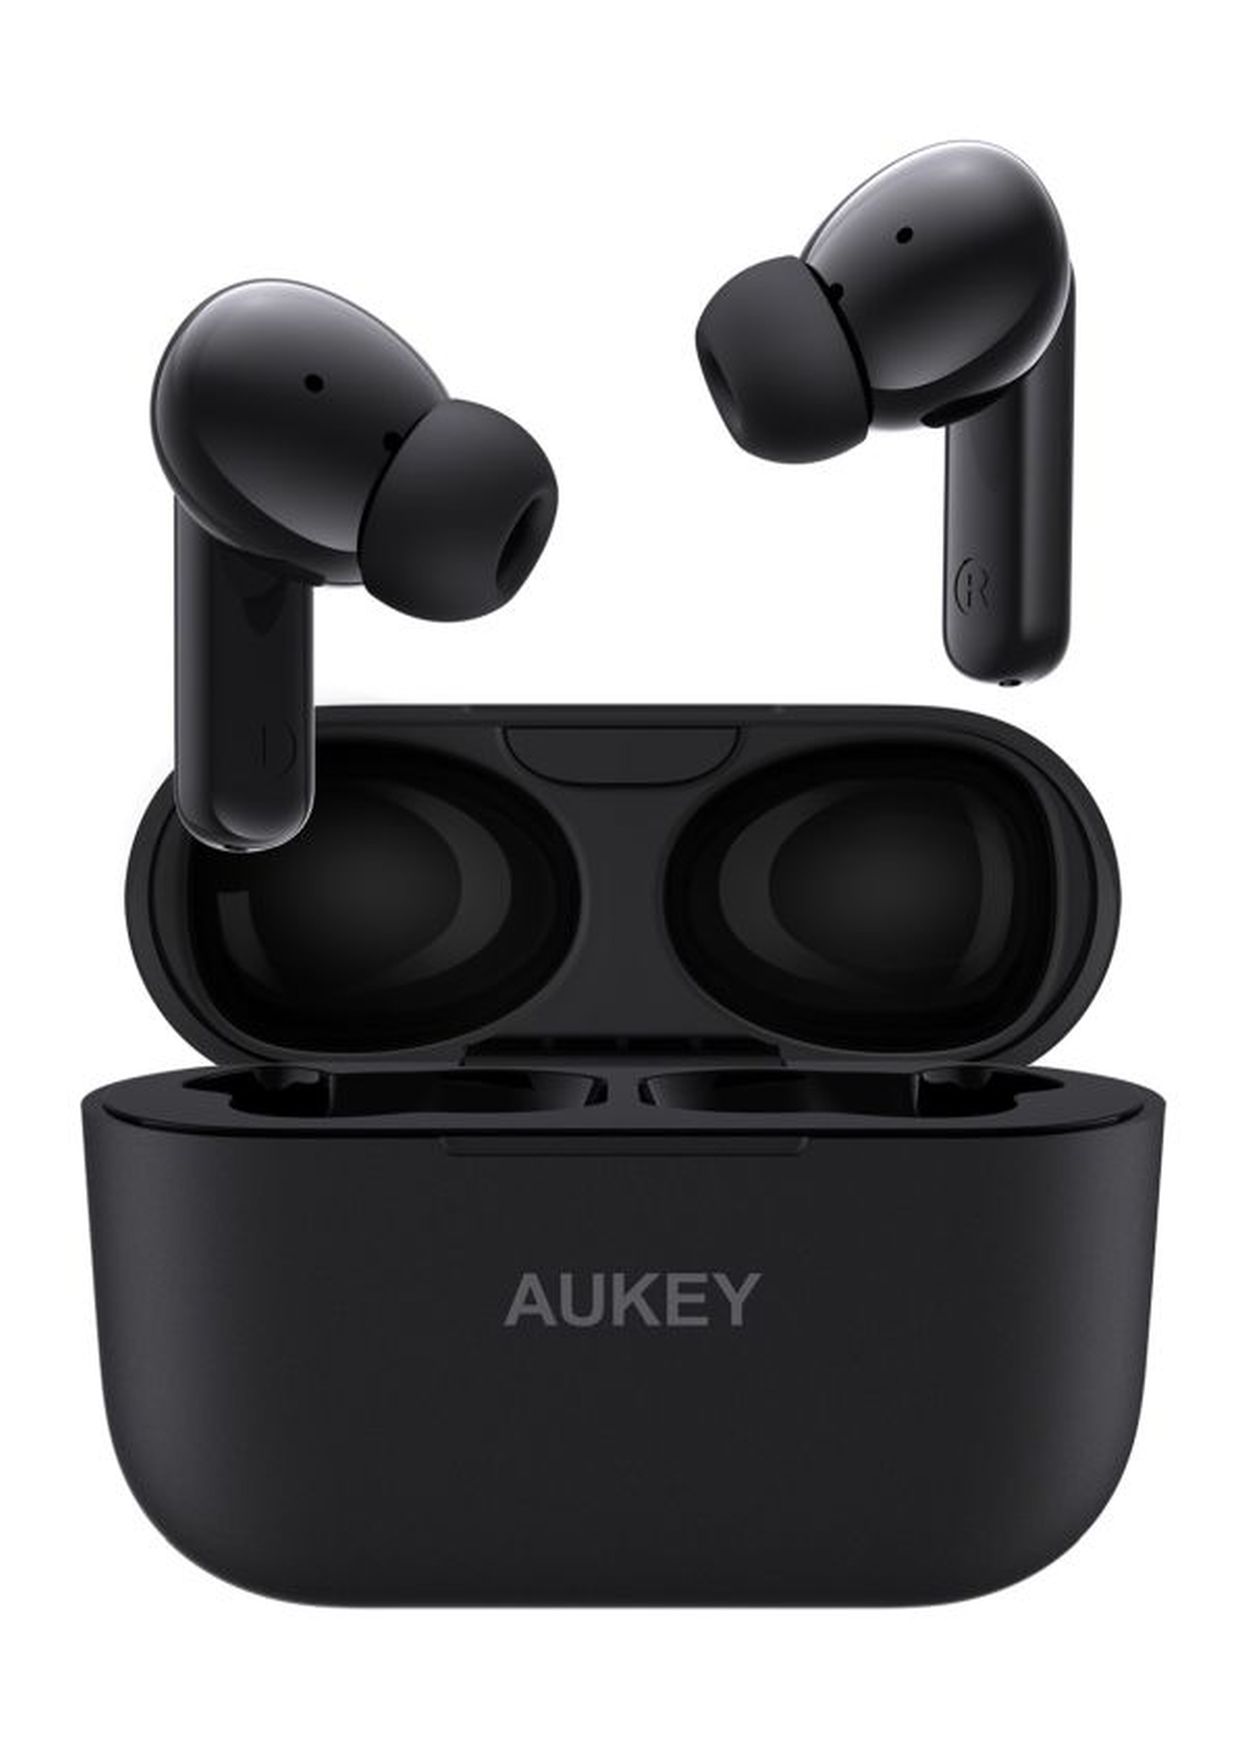 Aukey Earbuds are now available at Aeon Accessories!